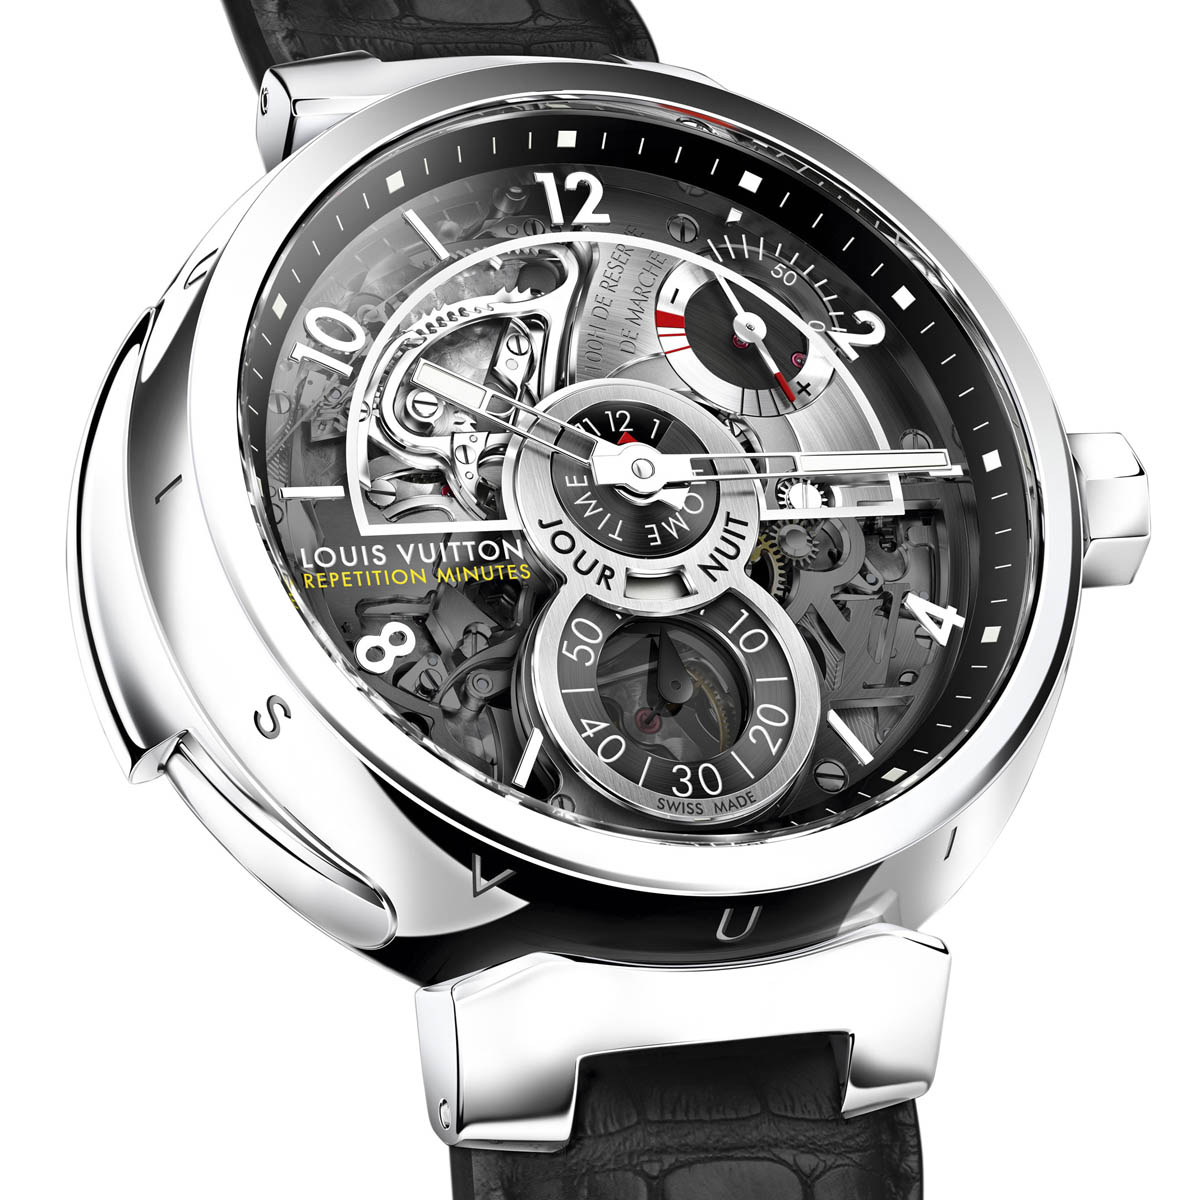 Louis Vuitton Tambour Spin Time. 12 Rotating cubes indicate the time.